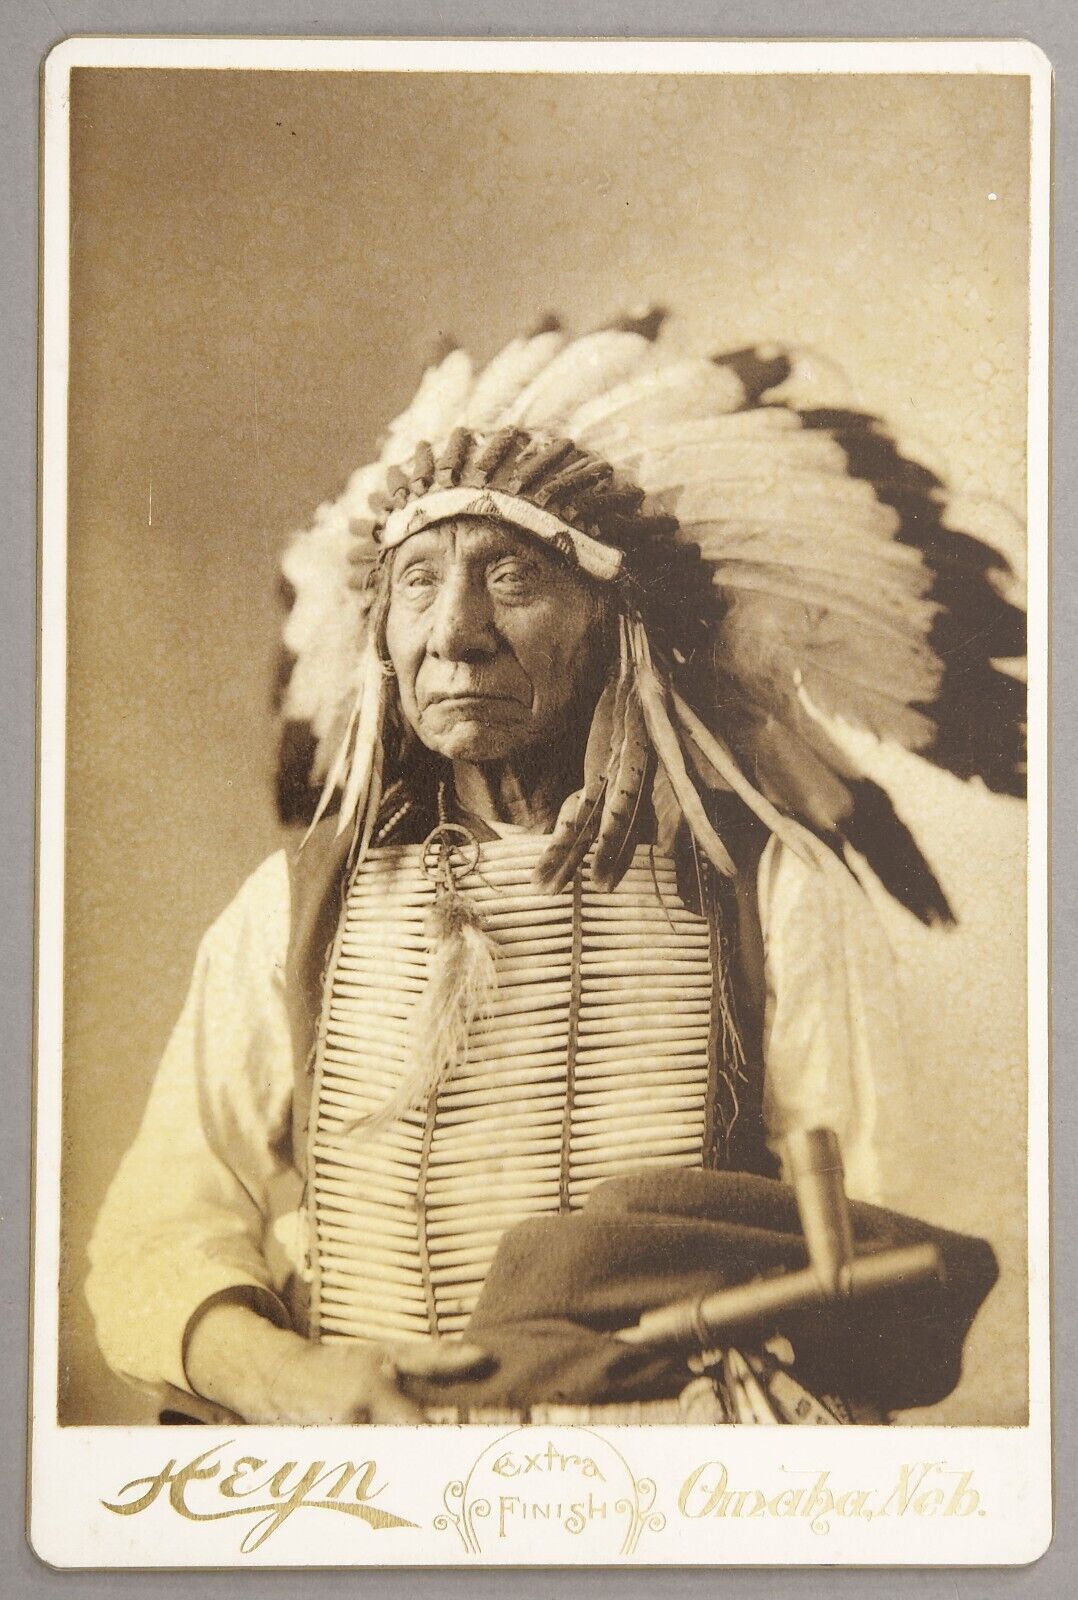 Native Indian Chief Red Cloud Photo Old 8 x 10 Photo Rare Find